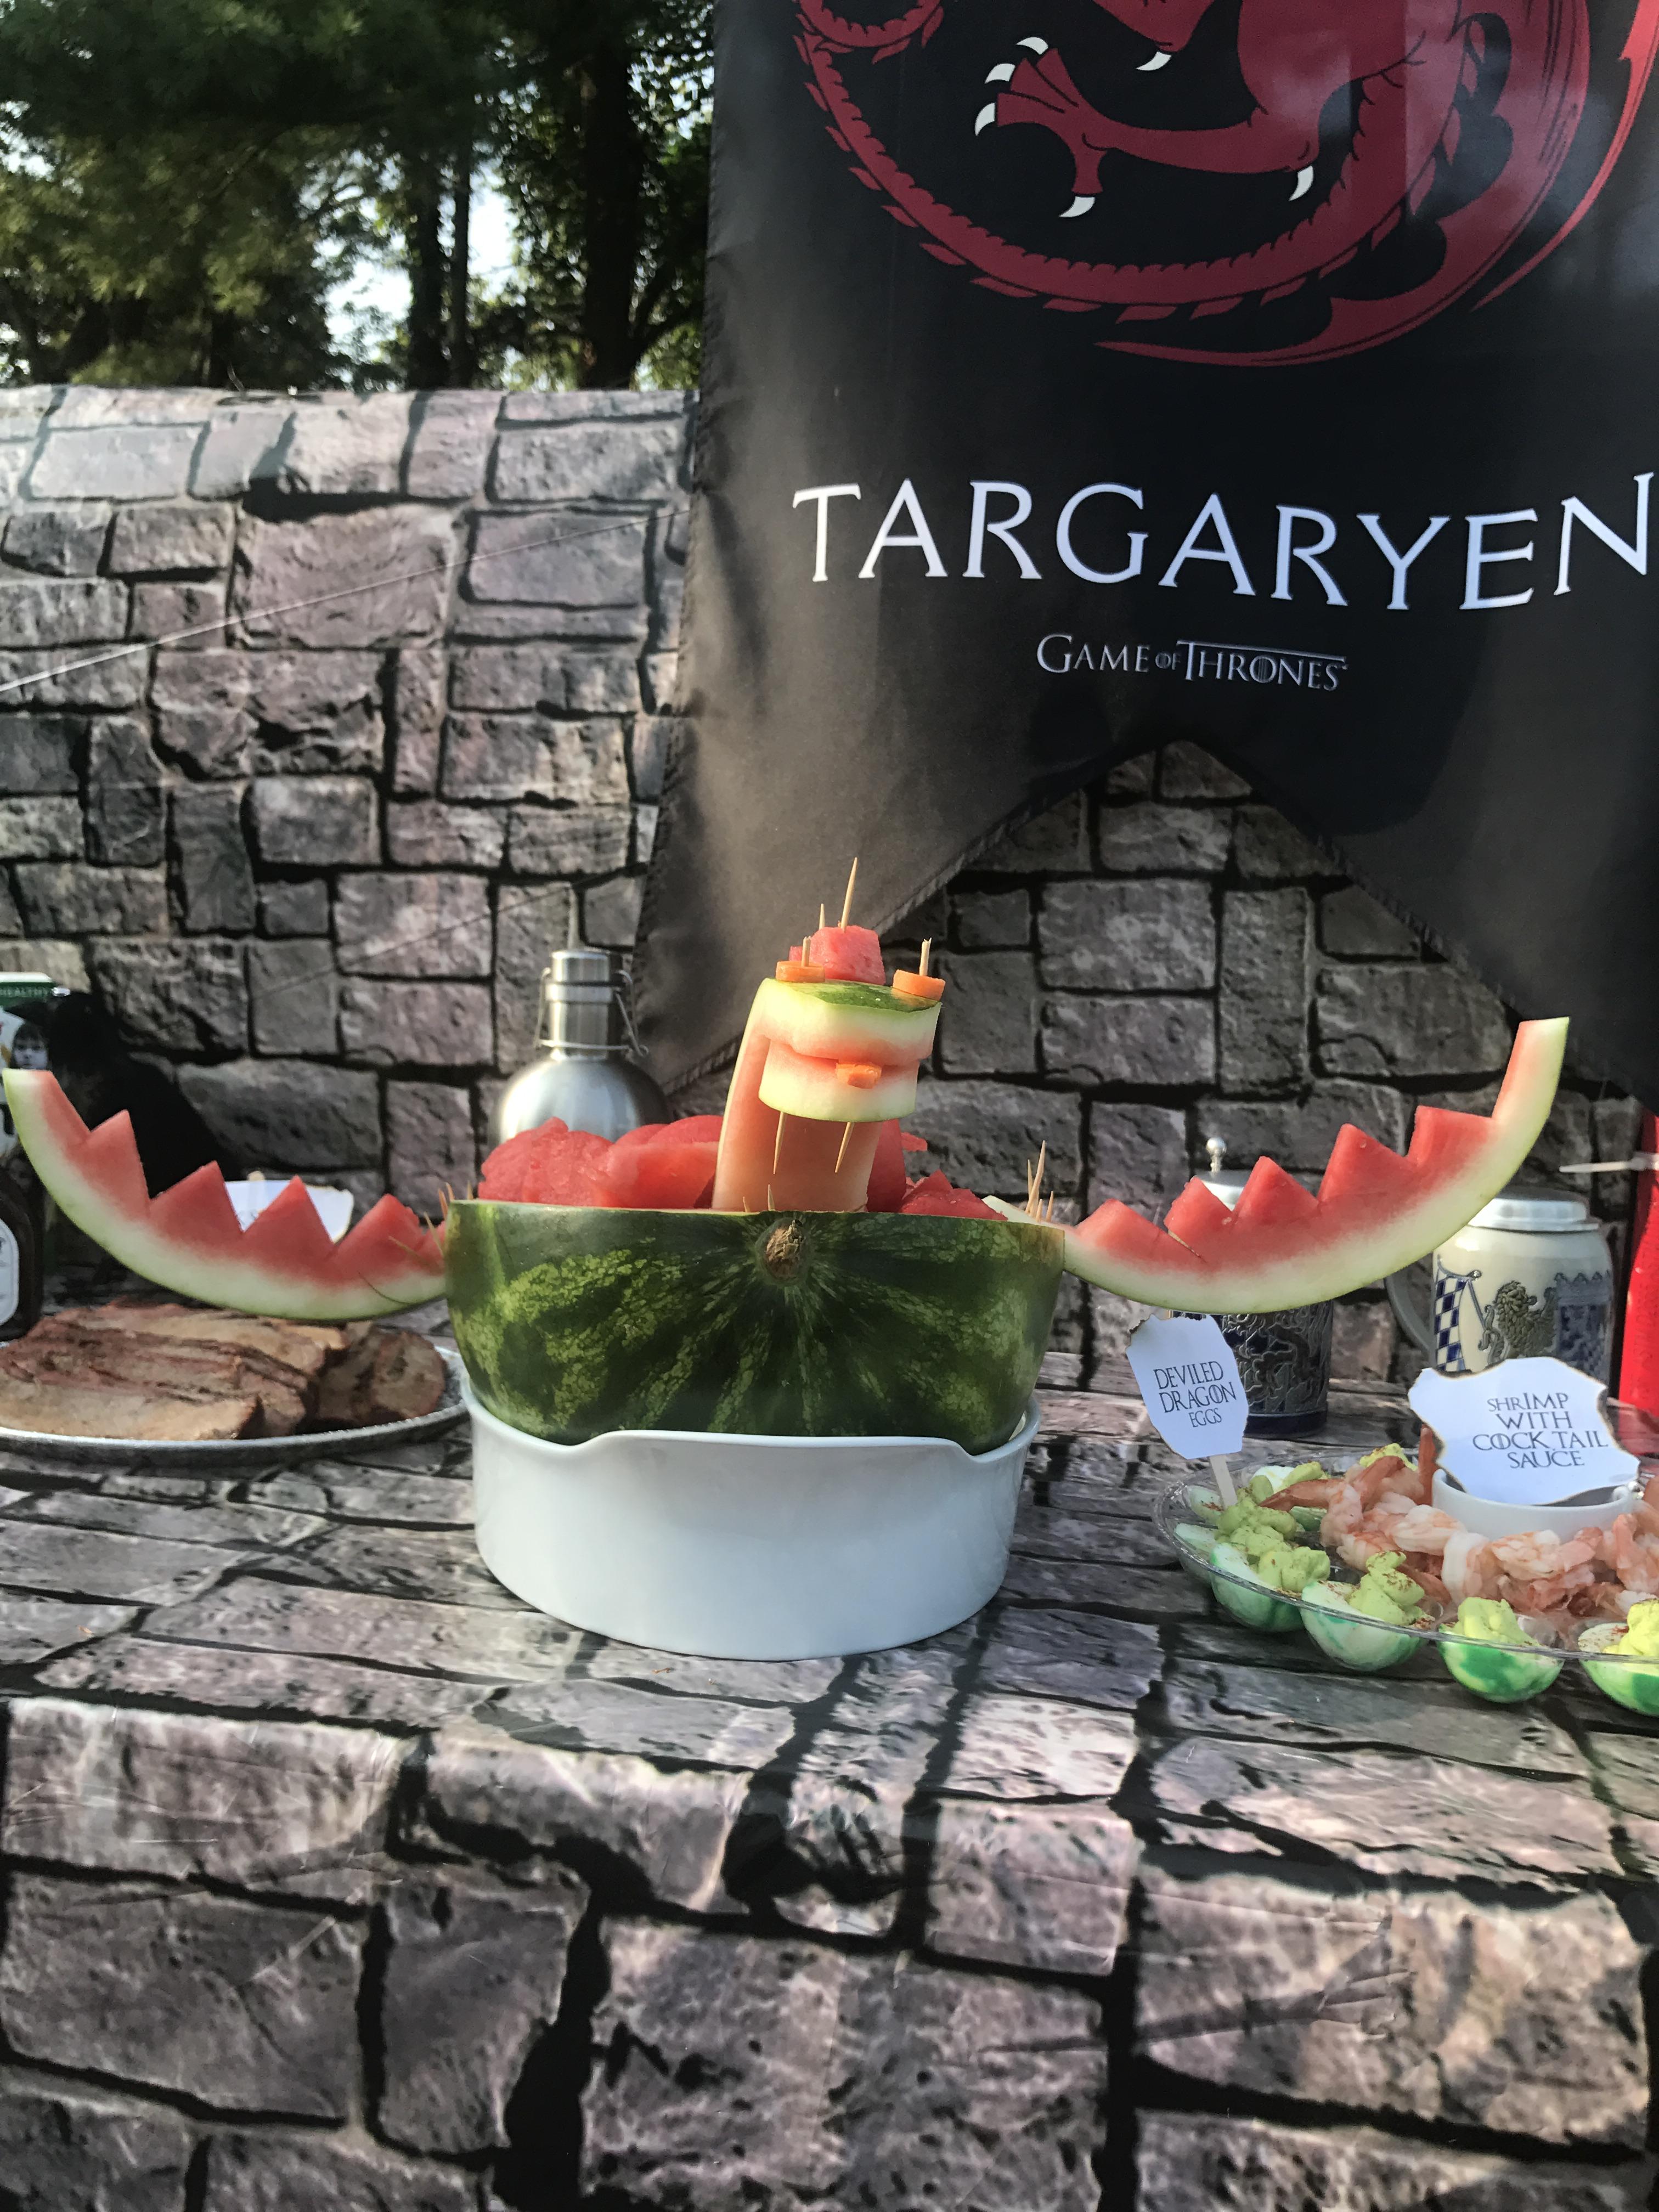 Game Of Thrones Themed Pool Party Is Definitely An awesome Place To Watch GoT